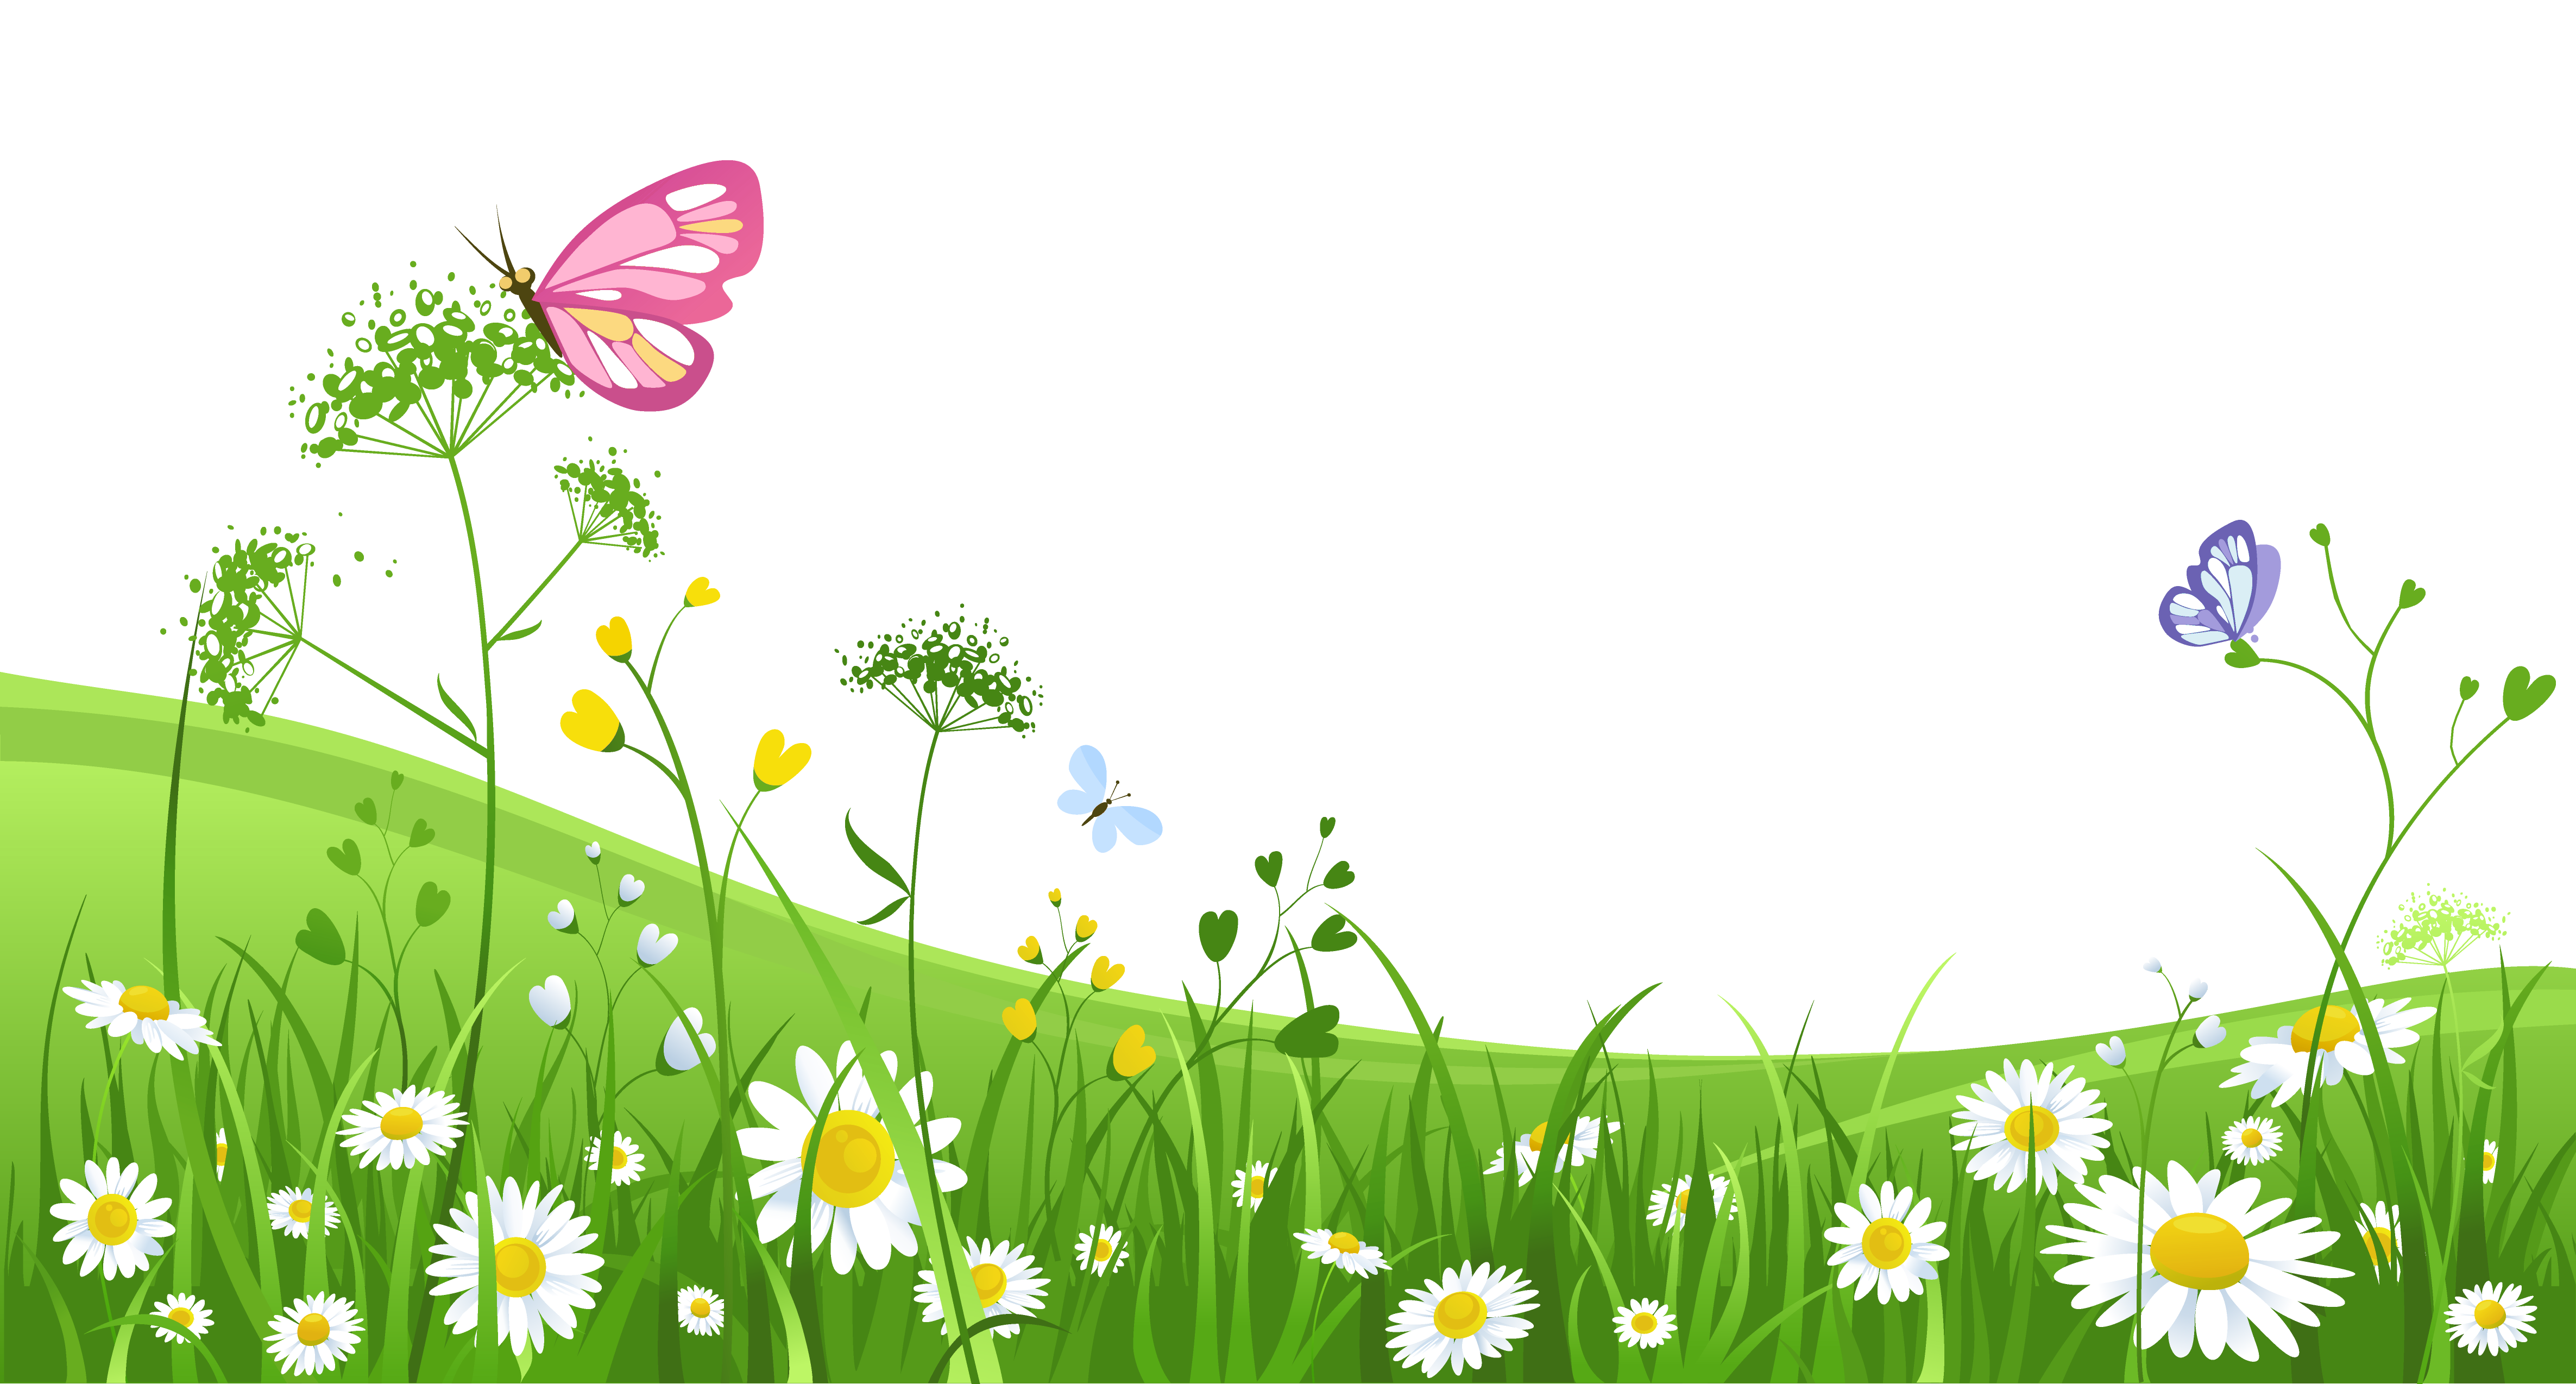 Grass clip art free free clipart image 5